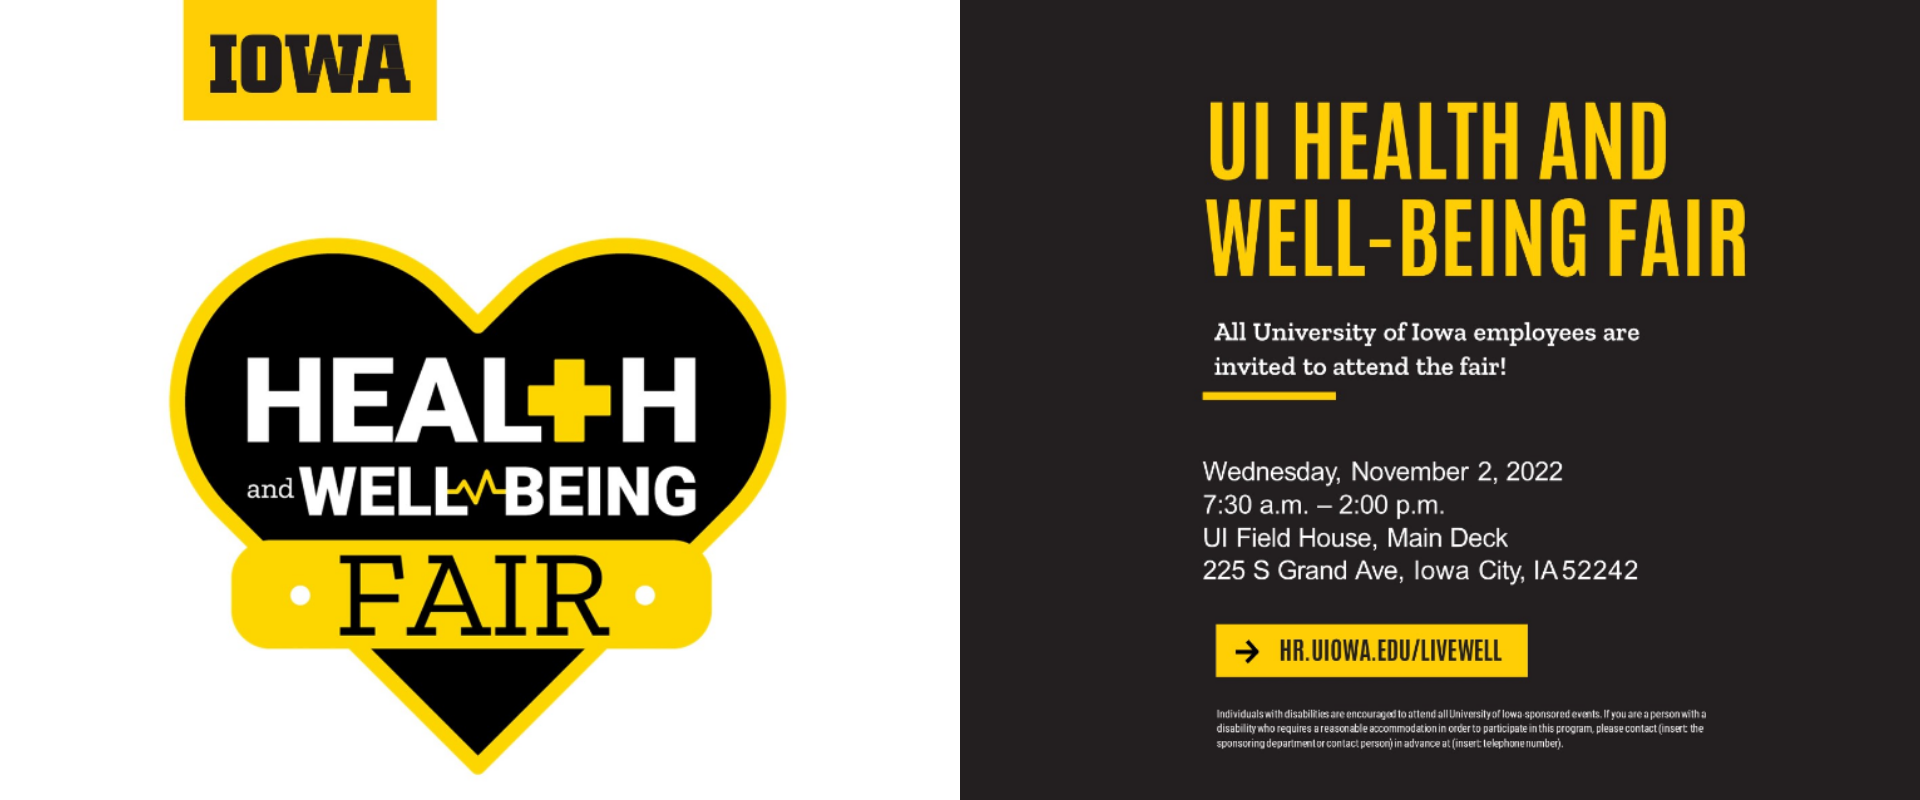 Health and wellbeing fair